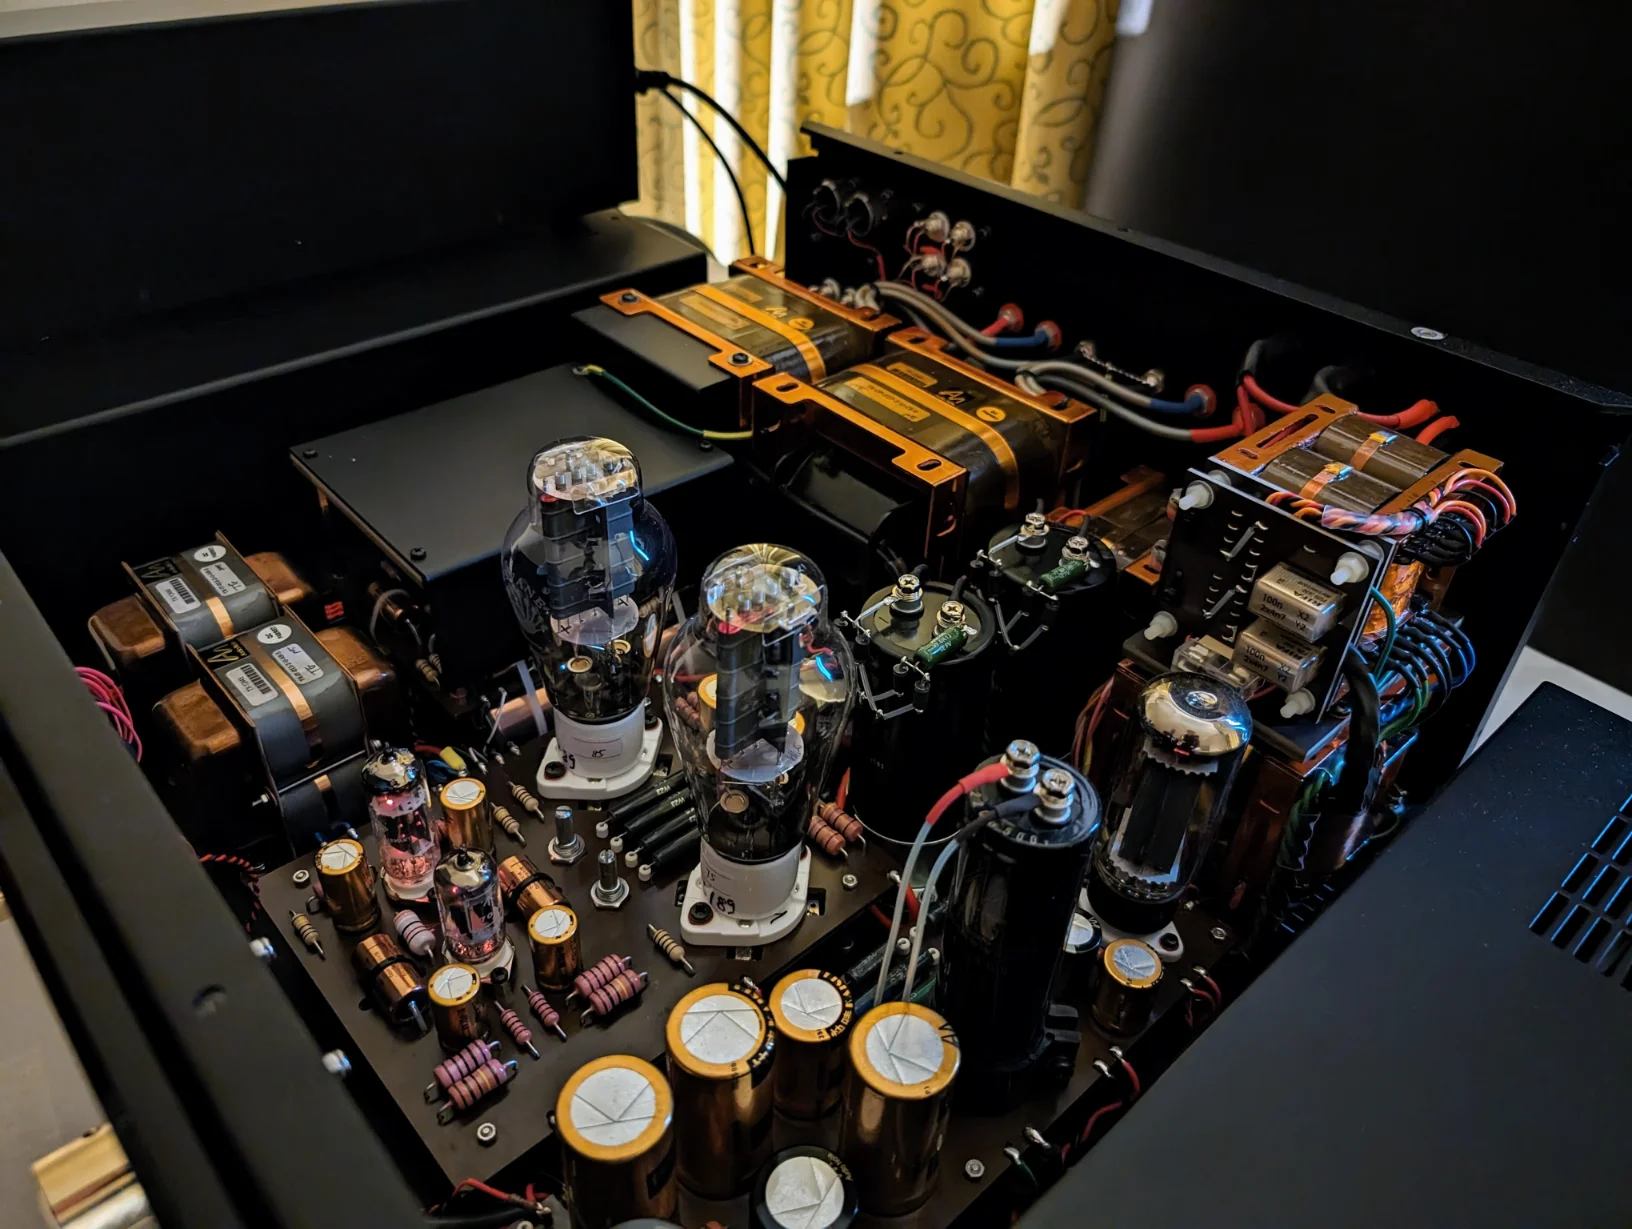 The Meishu Konzertmeister. WOW, Incredible. We have the Tonmeister Silver in the shop and it’s quickly become our “go to” amplifier in the valve room. This was another level, is another WOW too much?